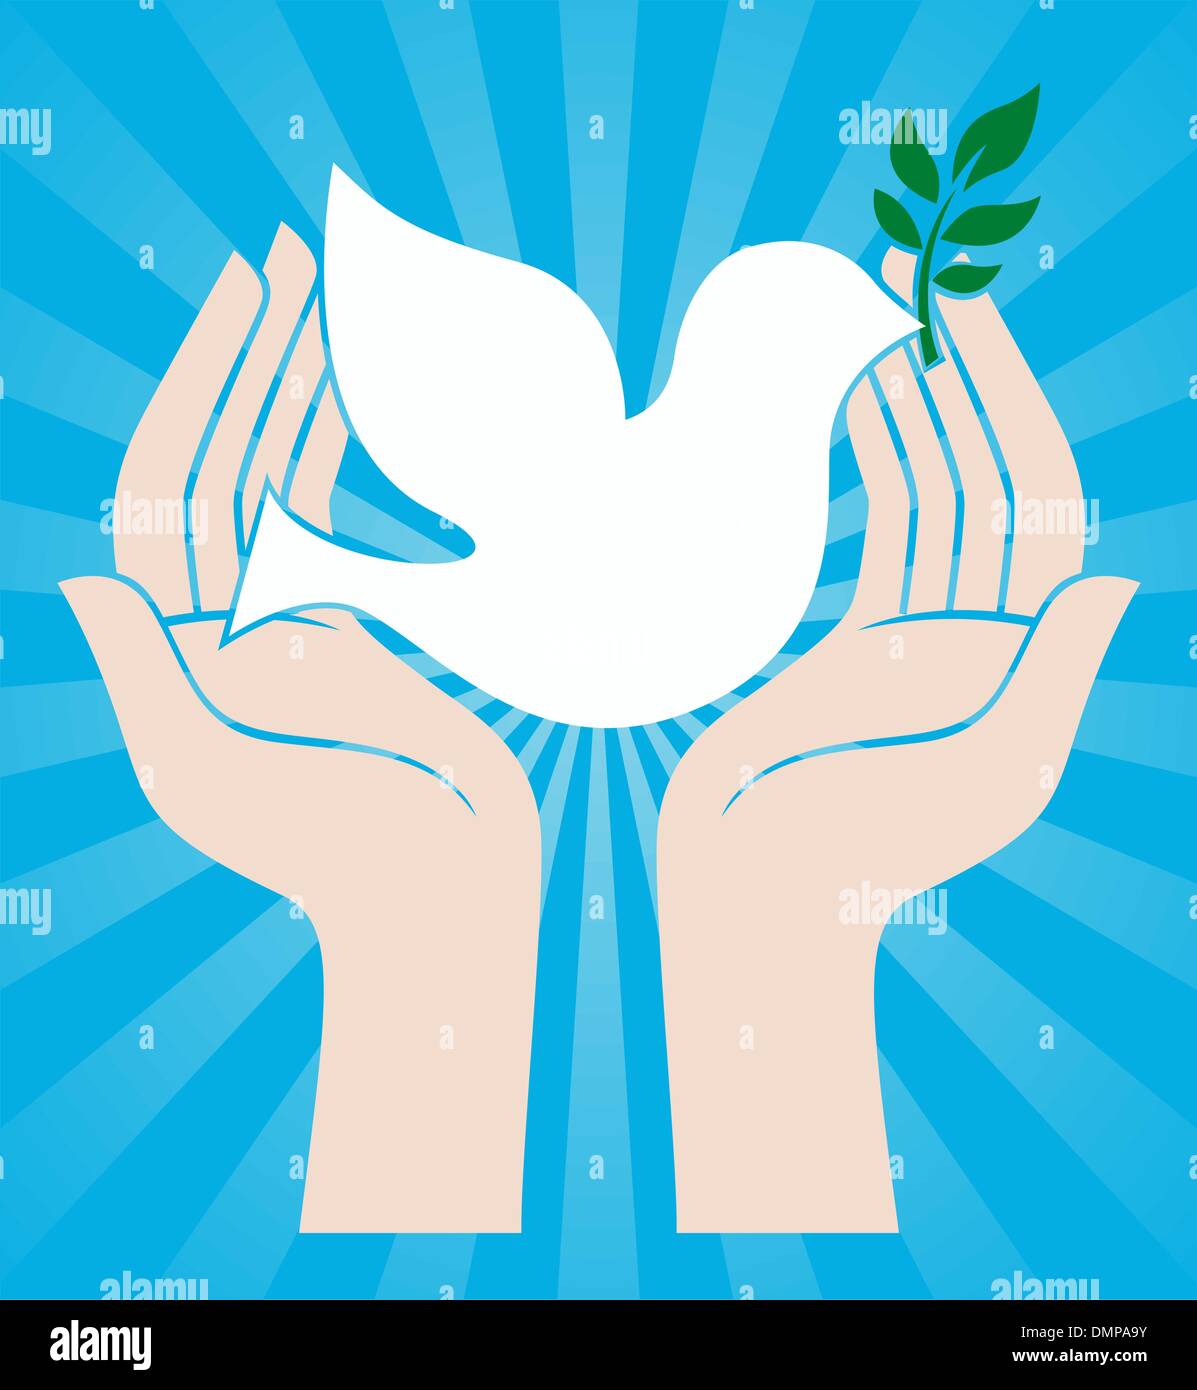 peace sign of human hands holding dove Stock Vector